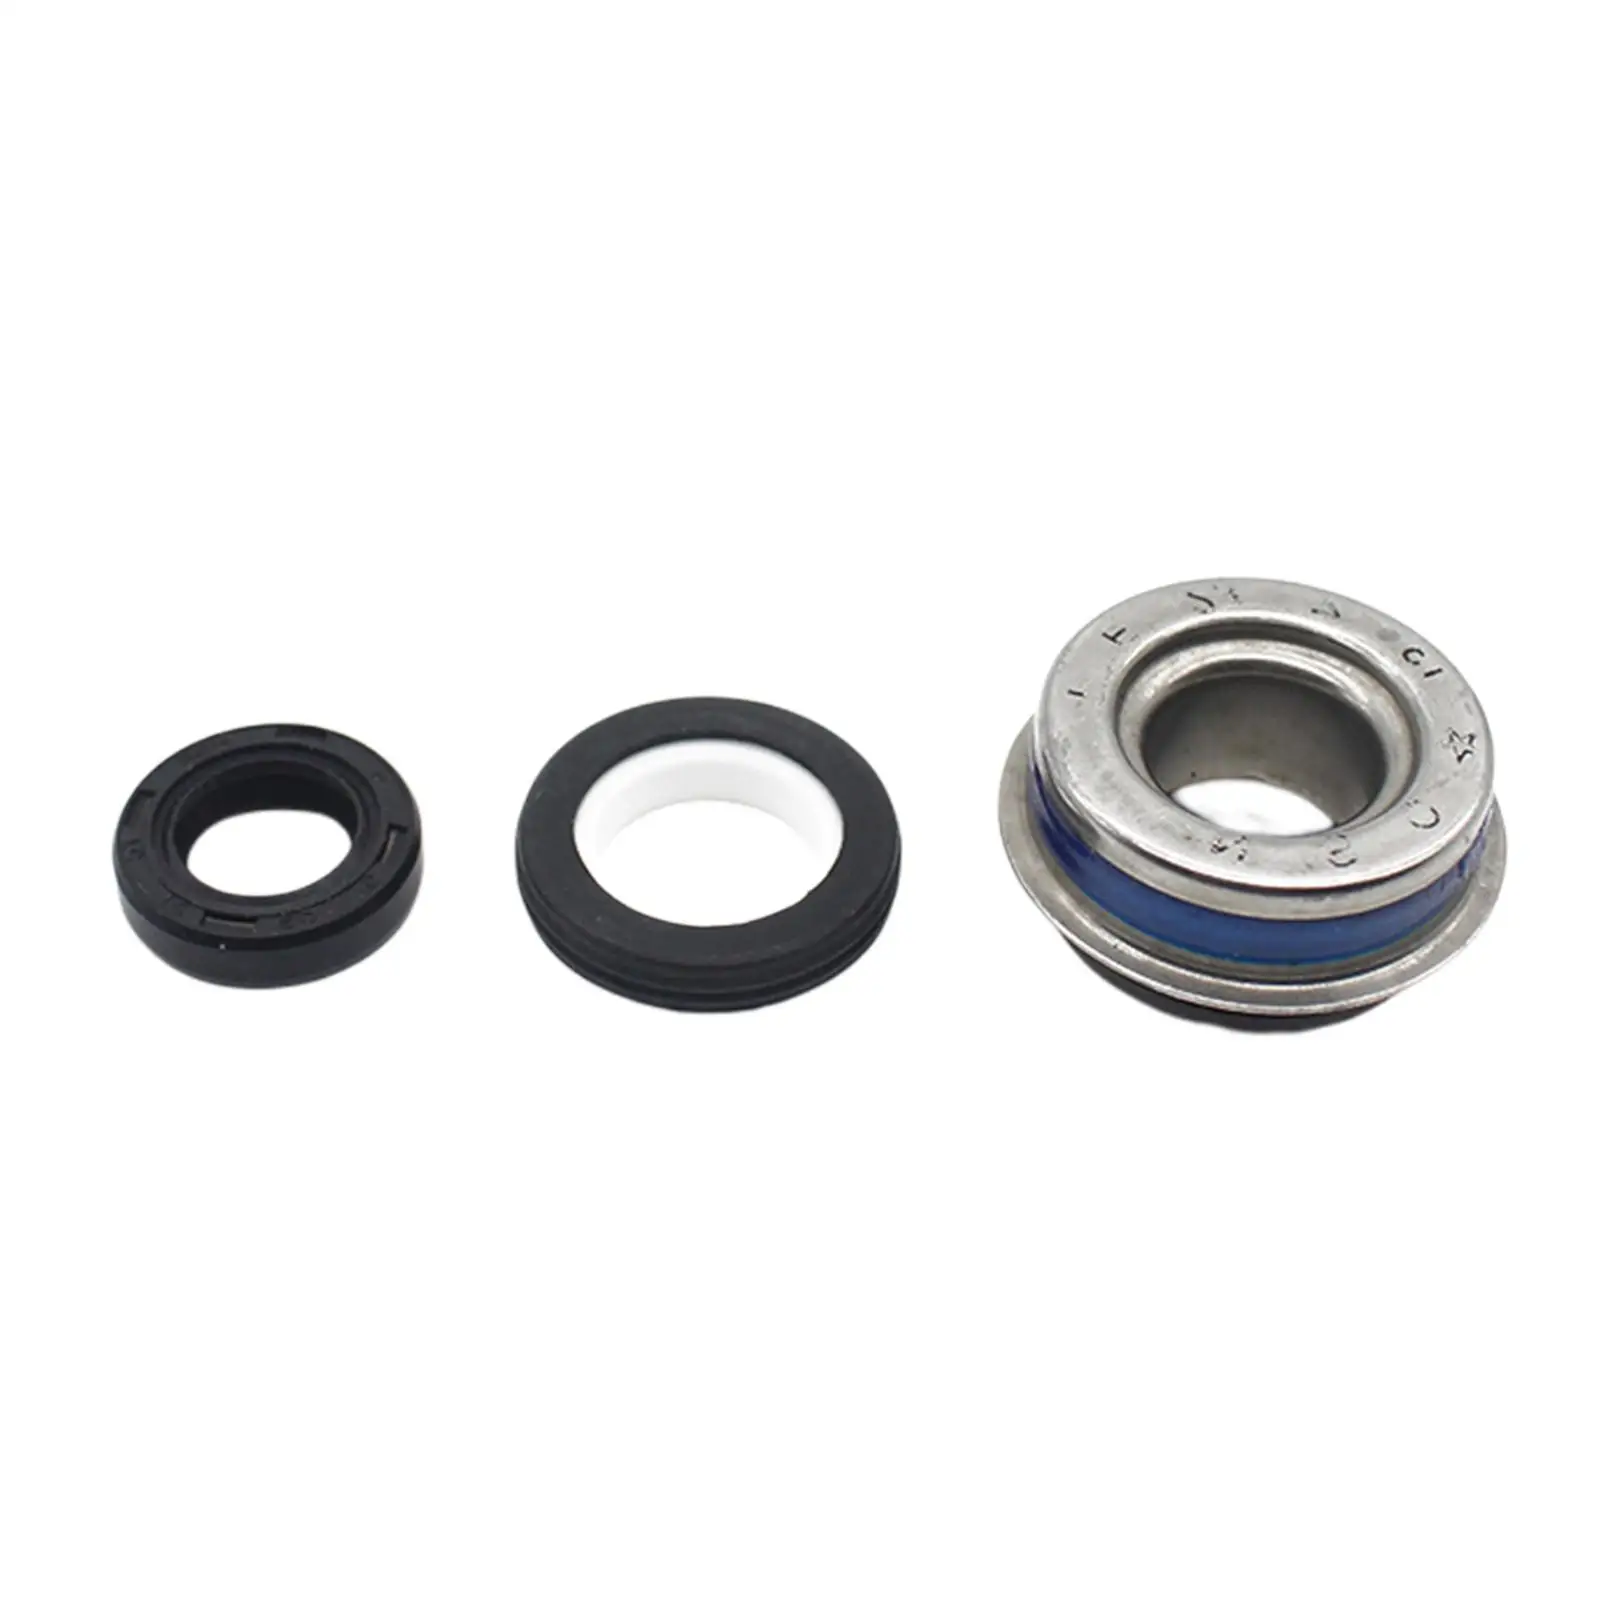 Motorcycle Water Pump Oil Seals Fit for Yamaha XP500 Tmax Tdm850 Direct Replaces Easy to Install Durable High Performance